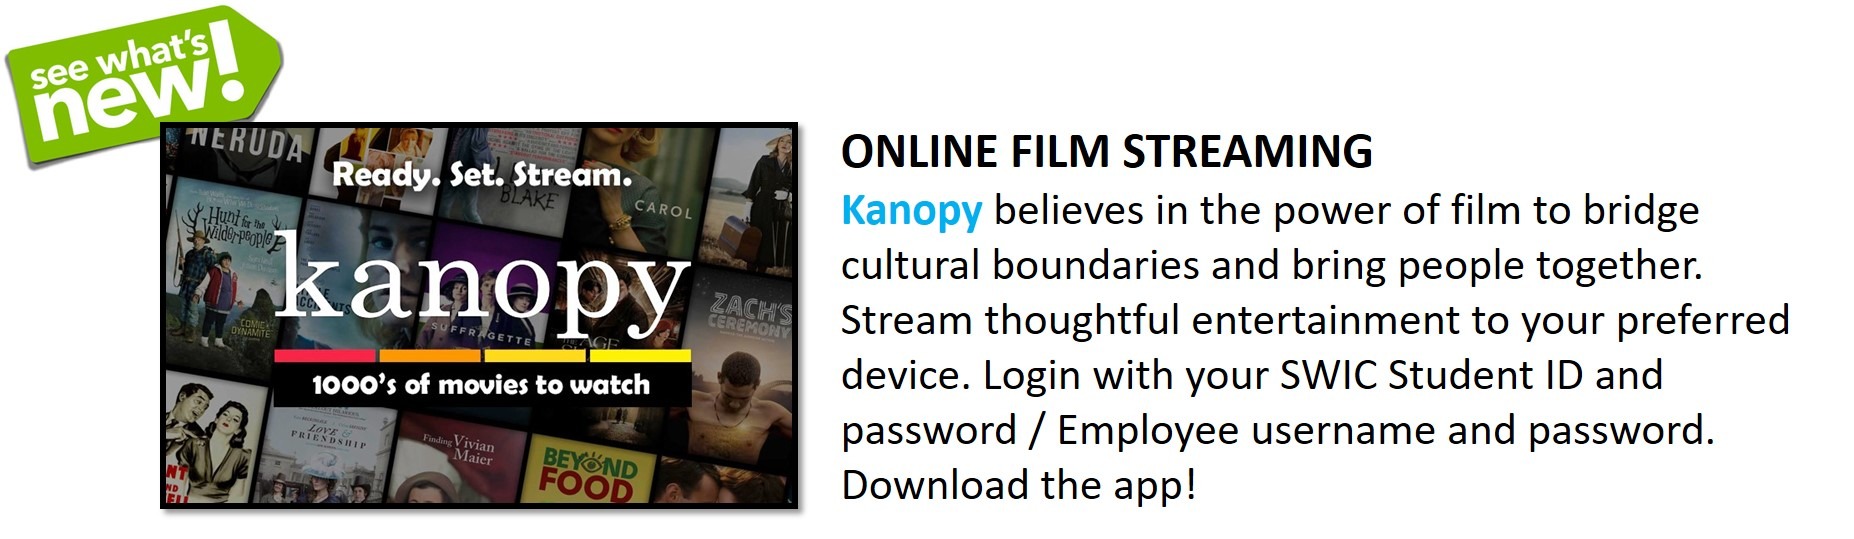 Library - Kanopy (3)